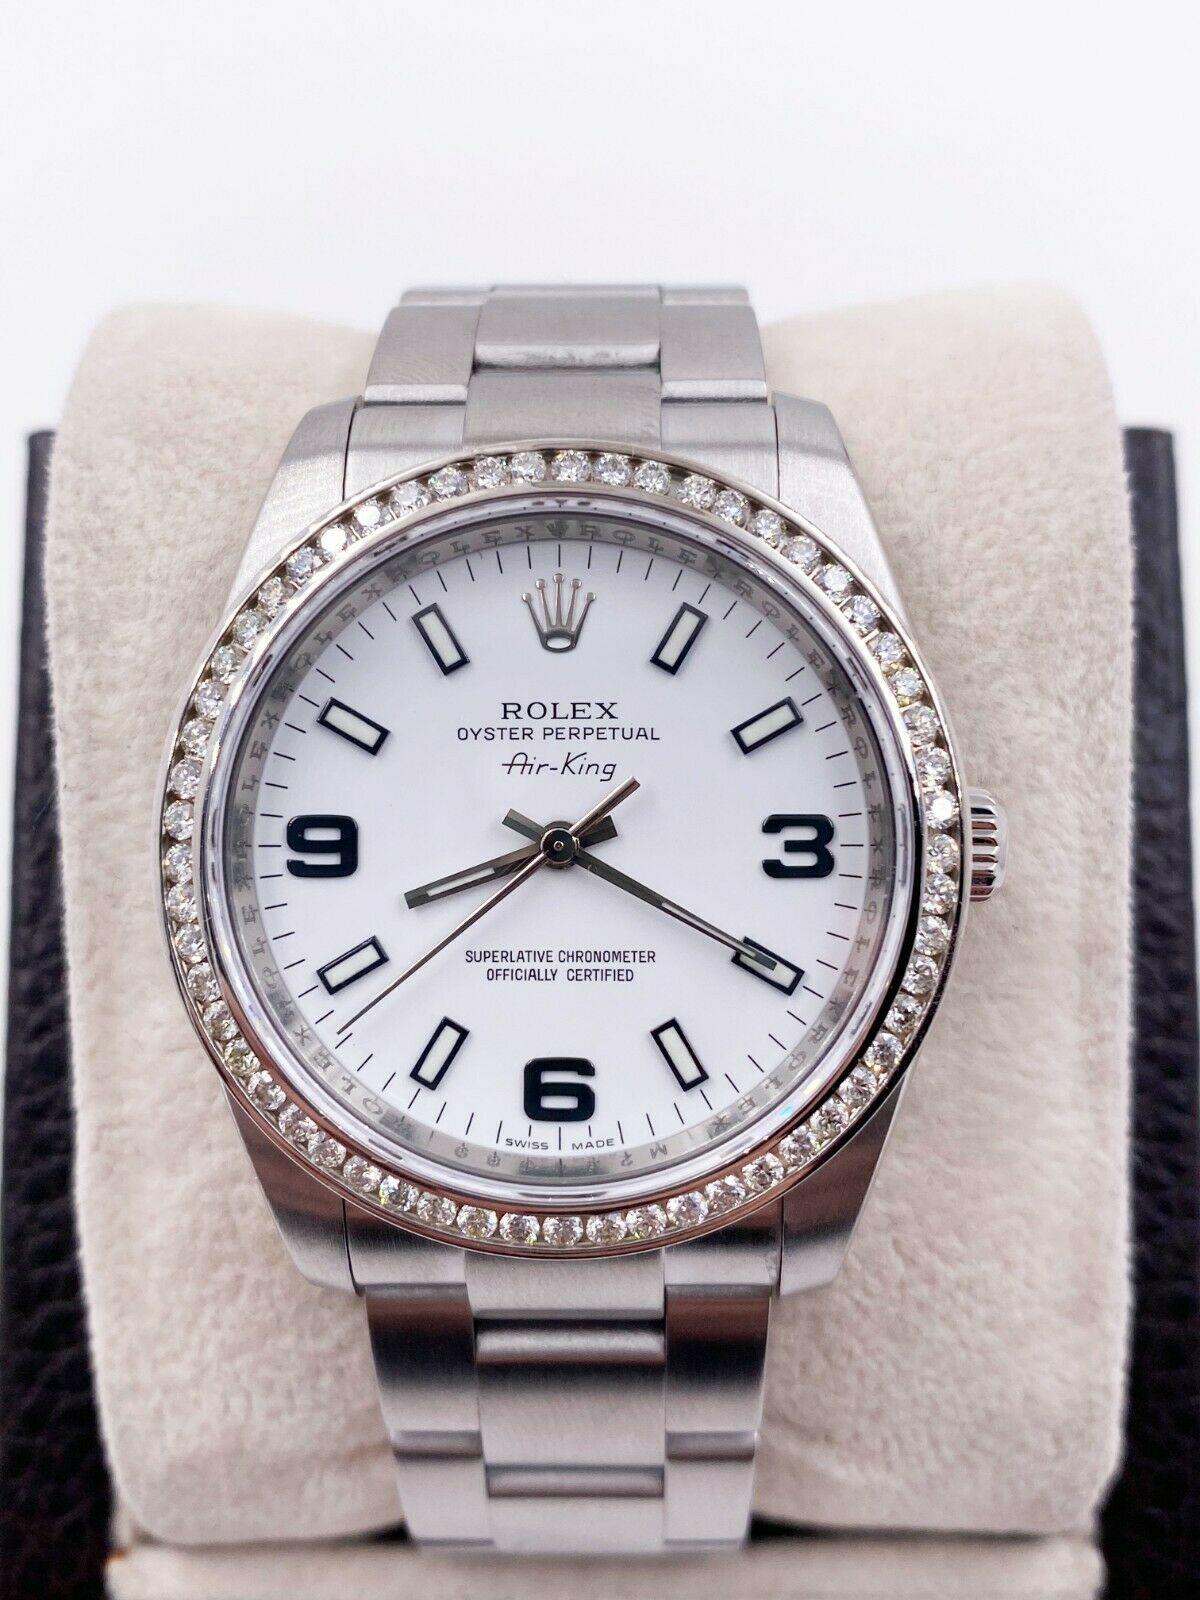 Style Number: 114200



Serial: M254***


Year: 2008

 

Model: Air King

 

Case Material: Stainless Steel

 

Band: Stainless Steel Oyster Band

 

Bezel: Custom Diamond Bezel 

 

Dial: White 

 

Face: Sapphire Crystal 

 

Case Size: 34mm

